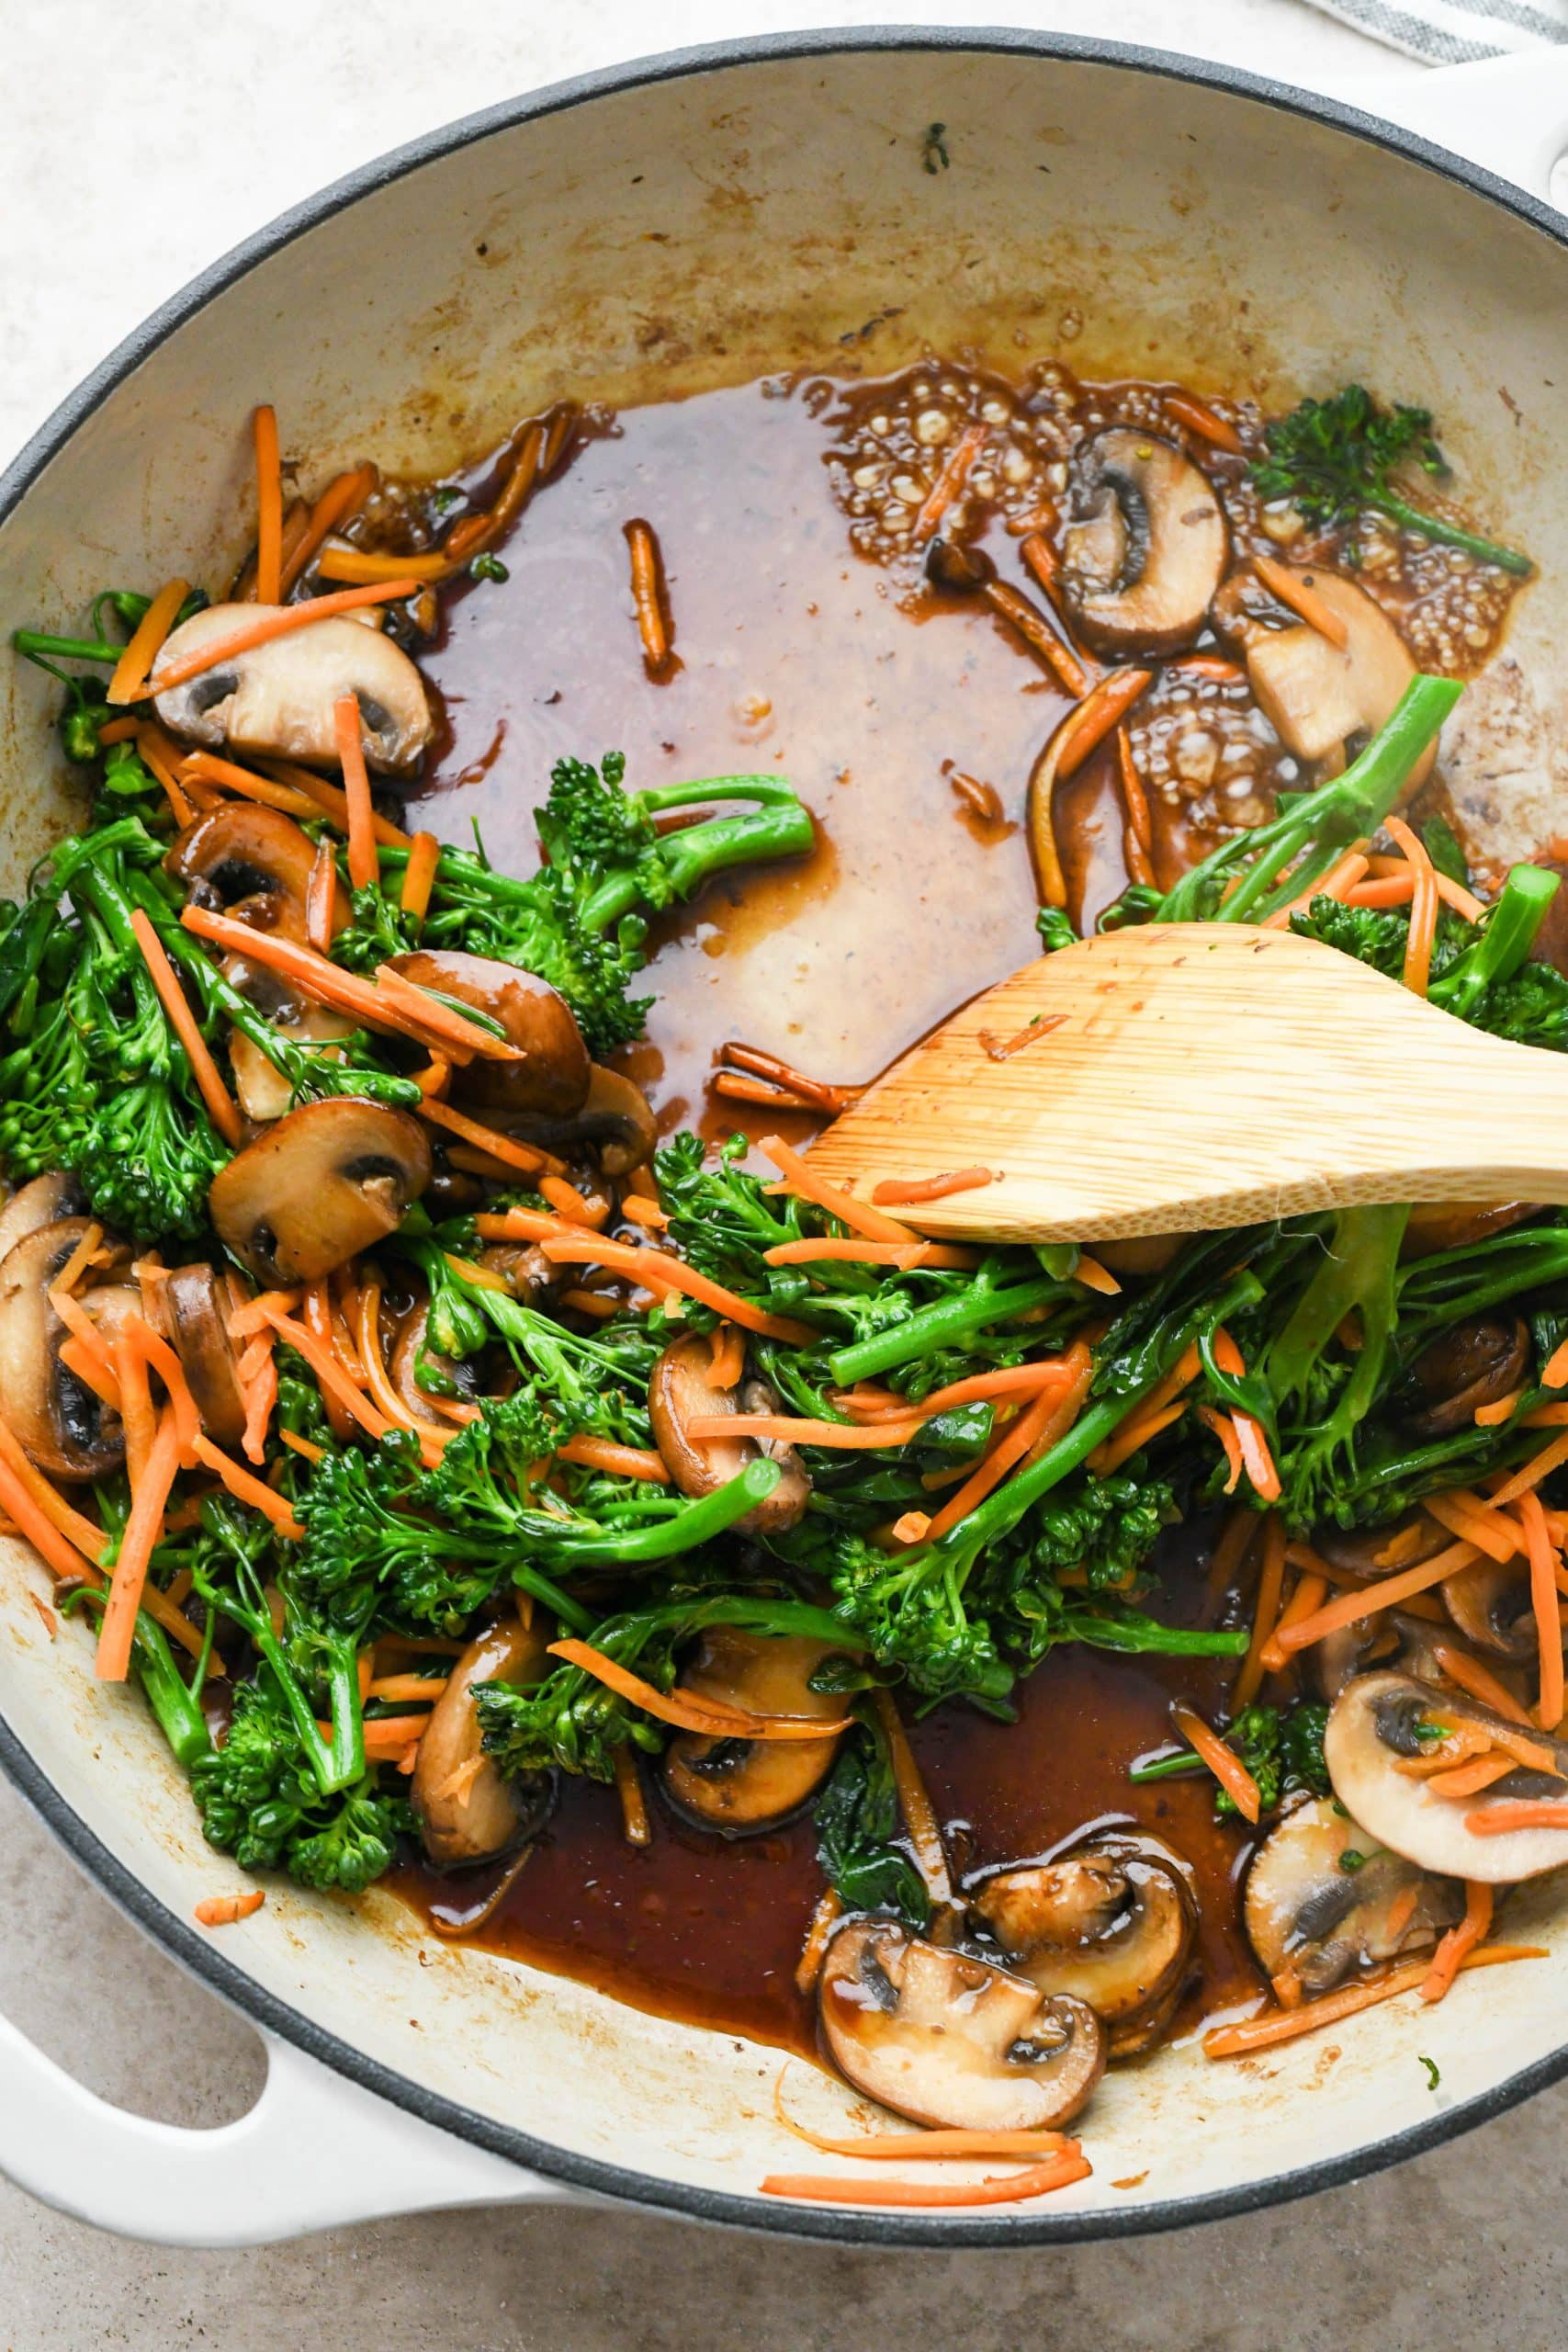 How to make soba noodle stir fry: Stir fry sauce in skillet with cooked veggies.